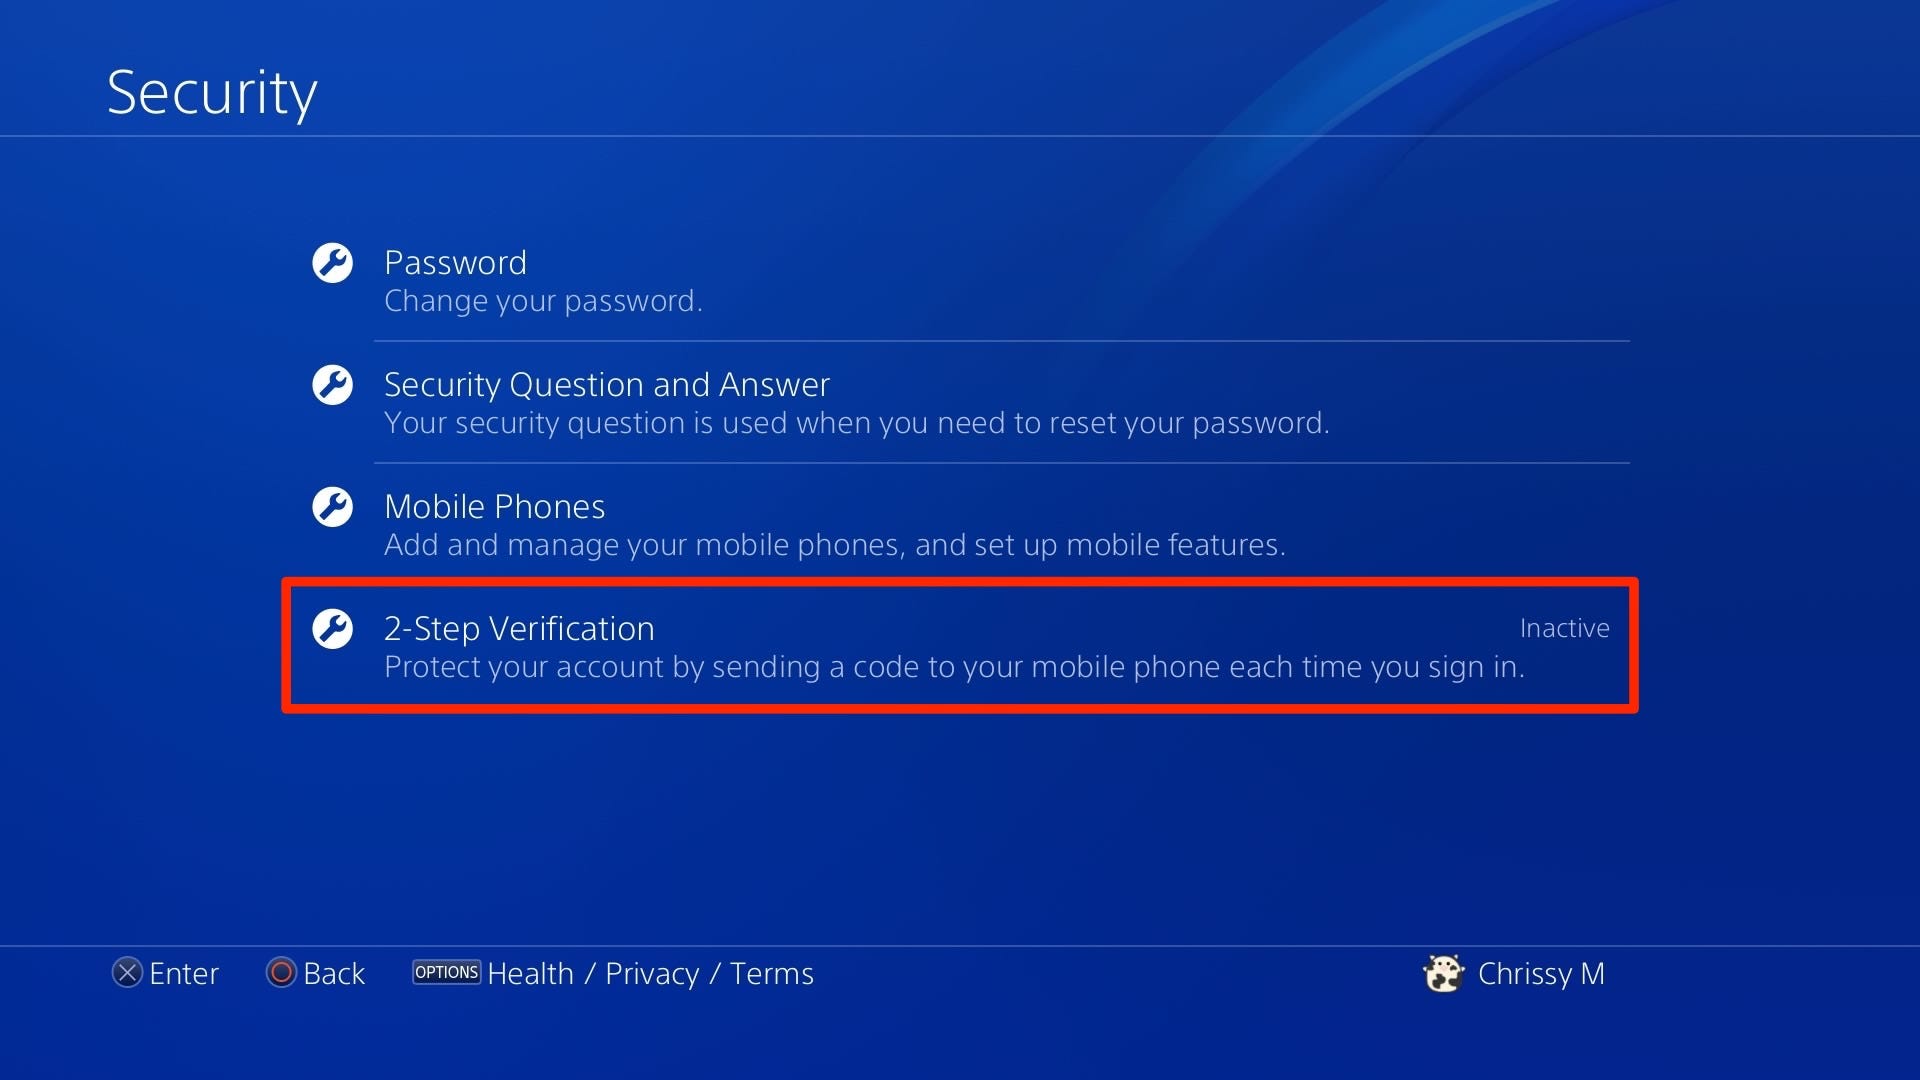 Here's How To Create A PSN Account On PS4 Or A PS5 - Fossbytes